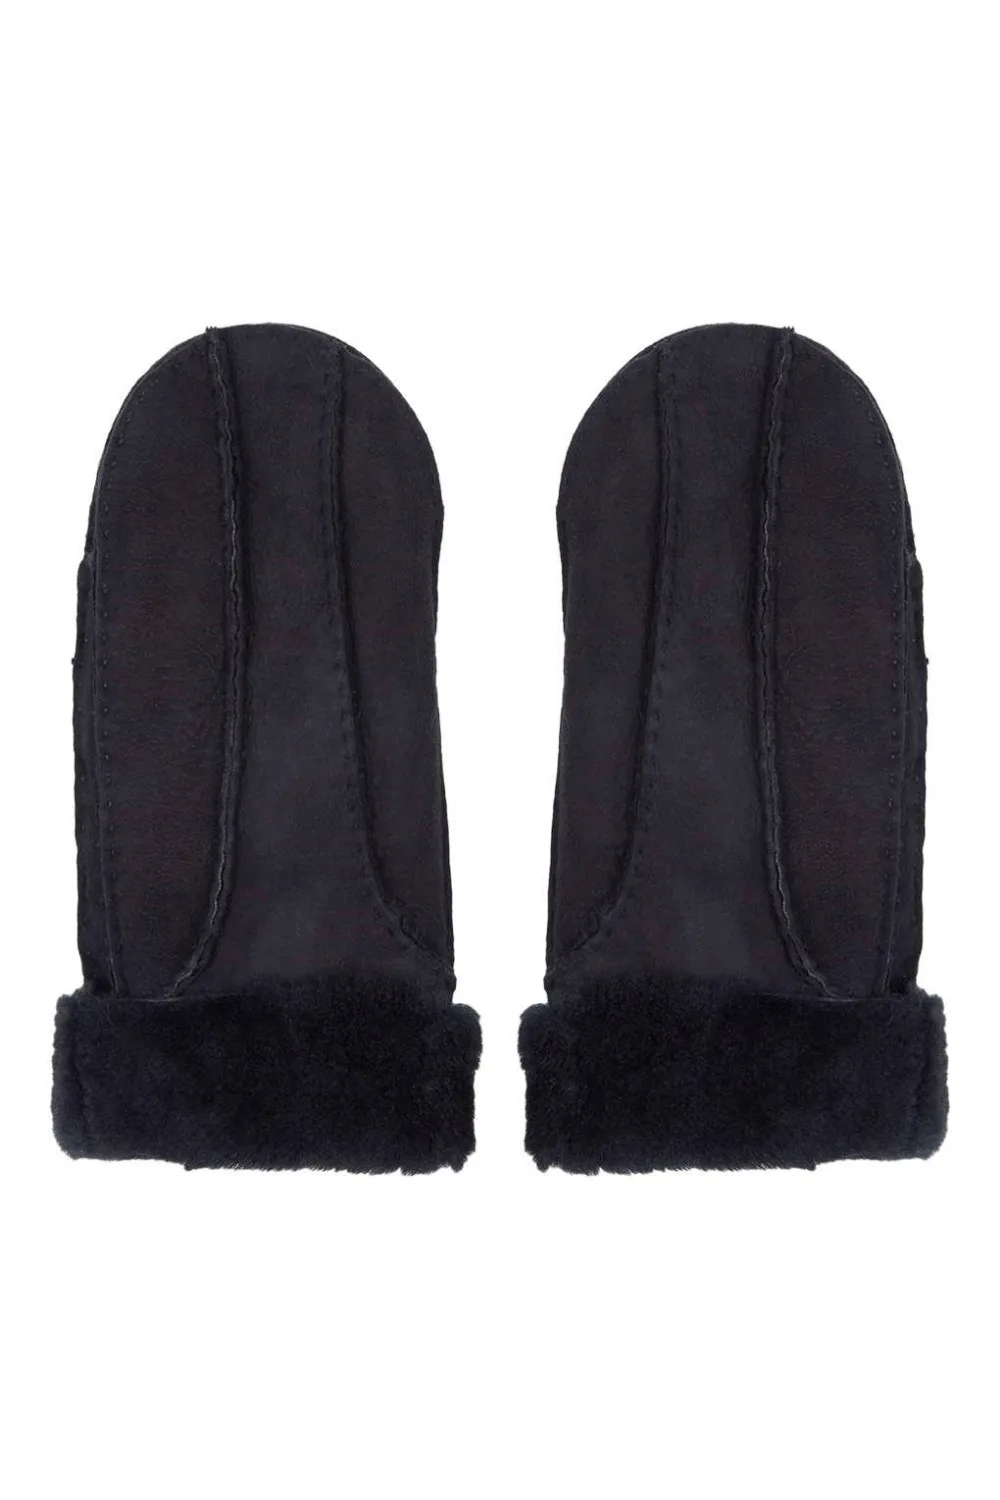 Winter leather and fur women gloves manufacturer with fur cuff make your hands warm